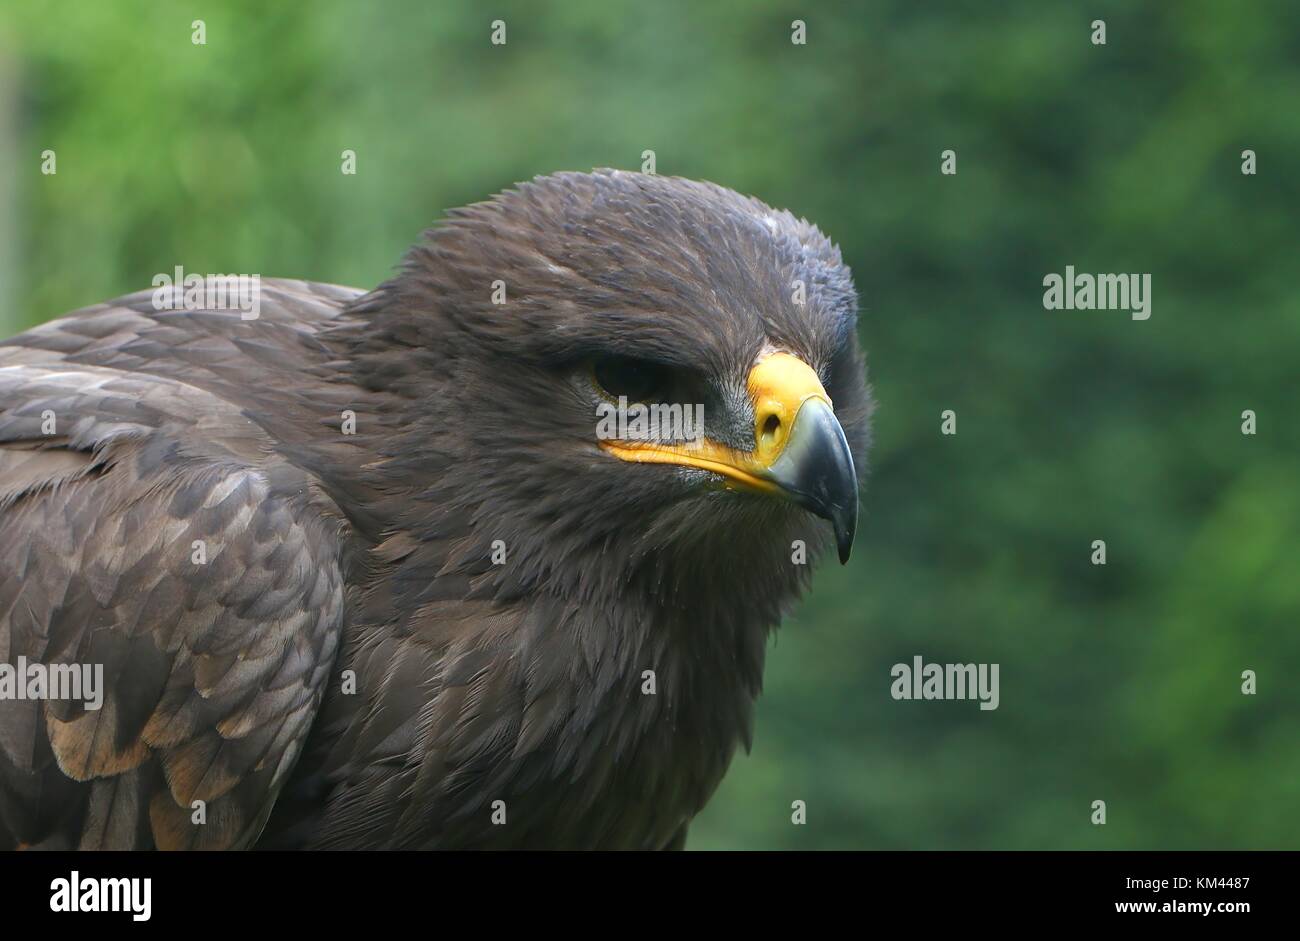 Central Asian Steppe eagle (Aquila nipalensis), closeup of the head. Stock Photo